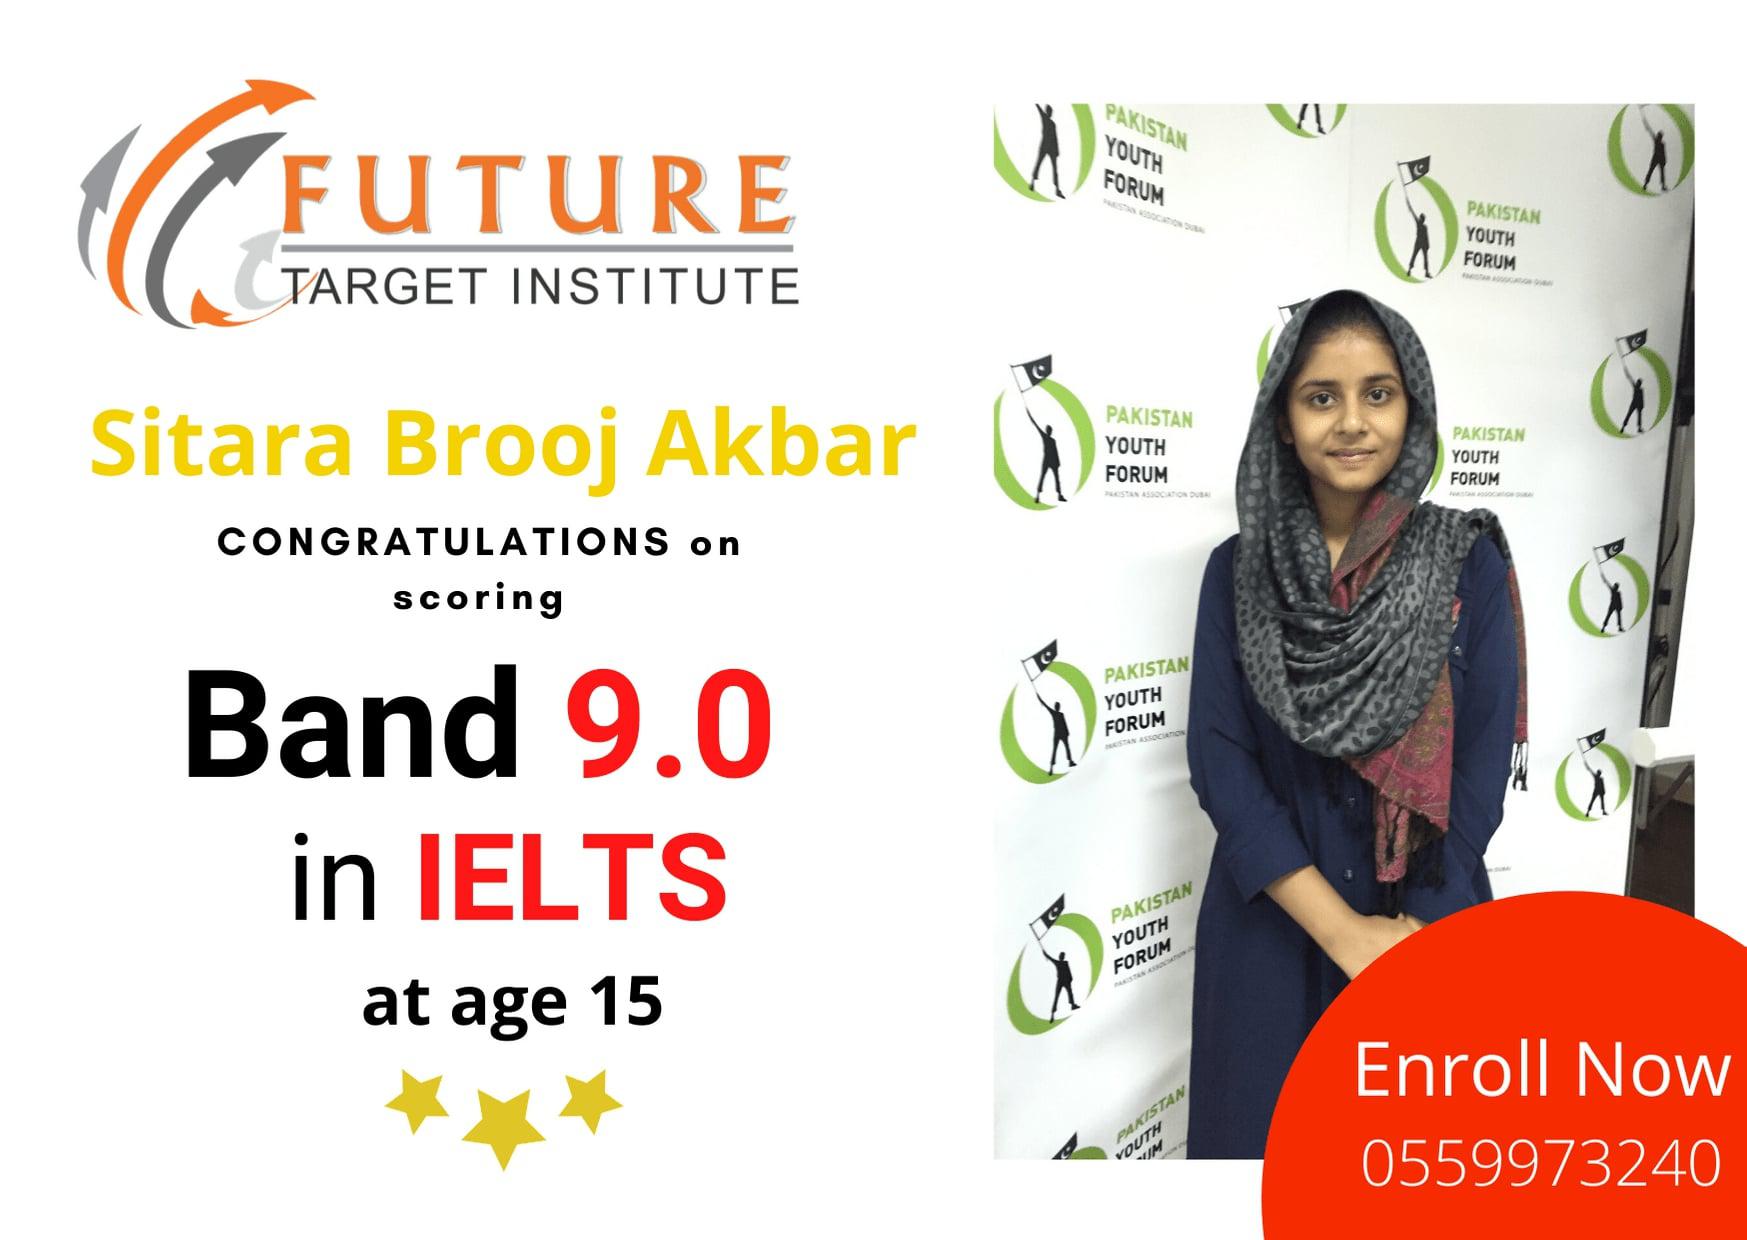 Future Target Institute's student scored Band 9 in the IELTS General Training Exam with the British Council in Dubai with the help of IELTS Practice Test.